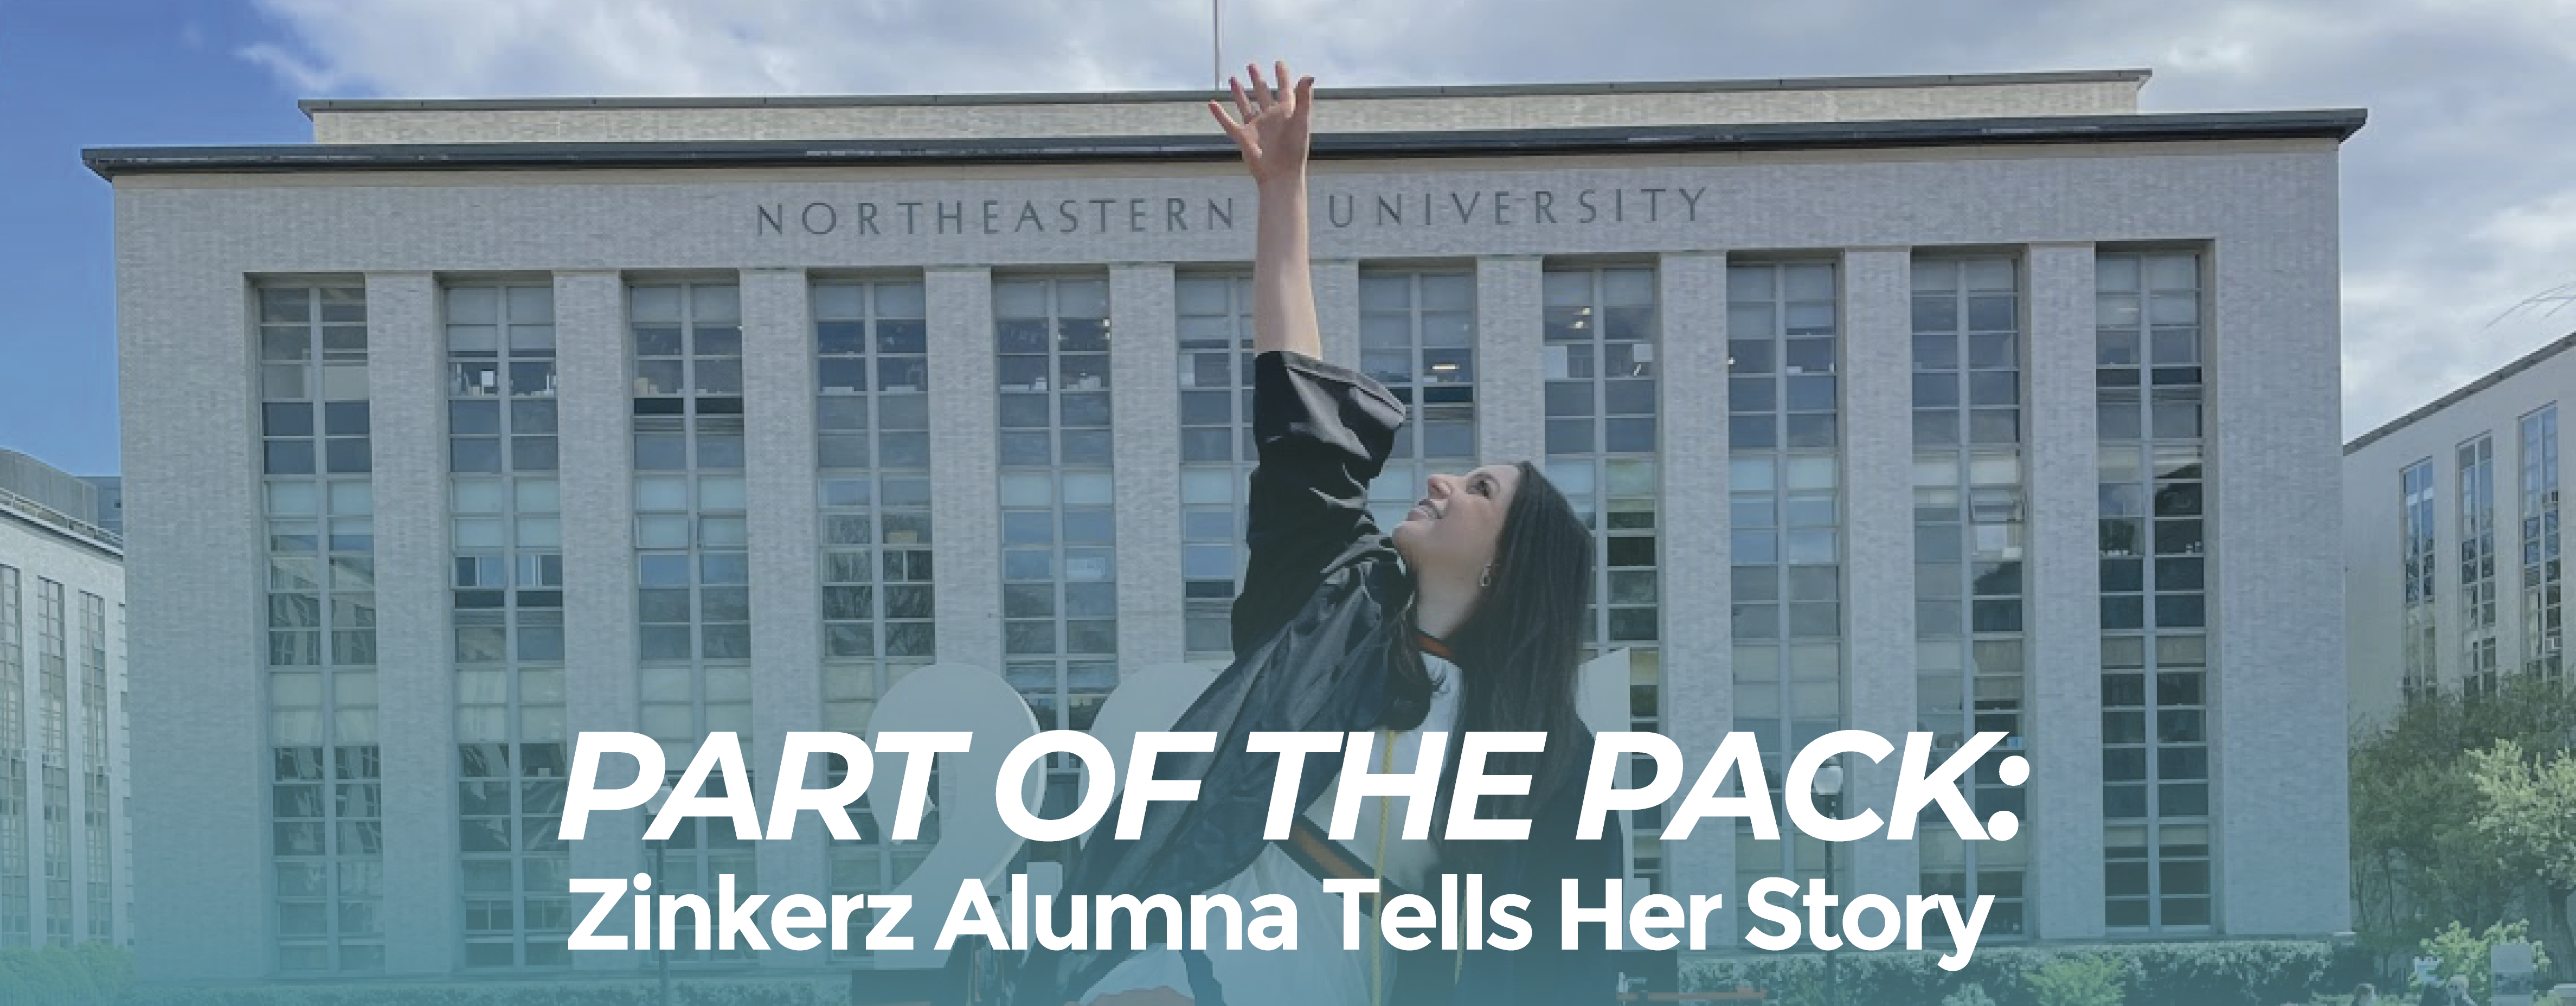 Part of the Pack: Zinkerz Alumna Tells Her Story